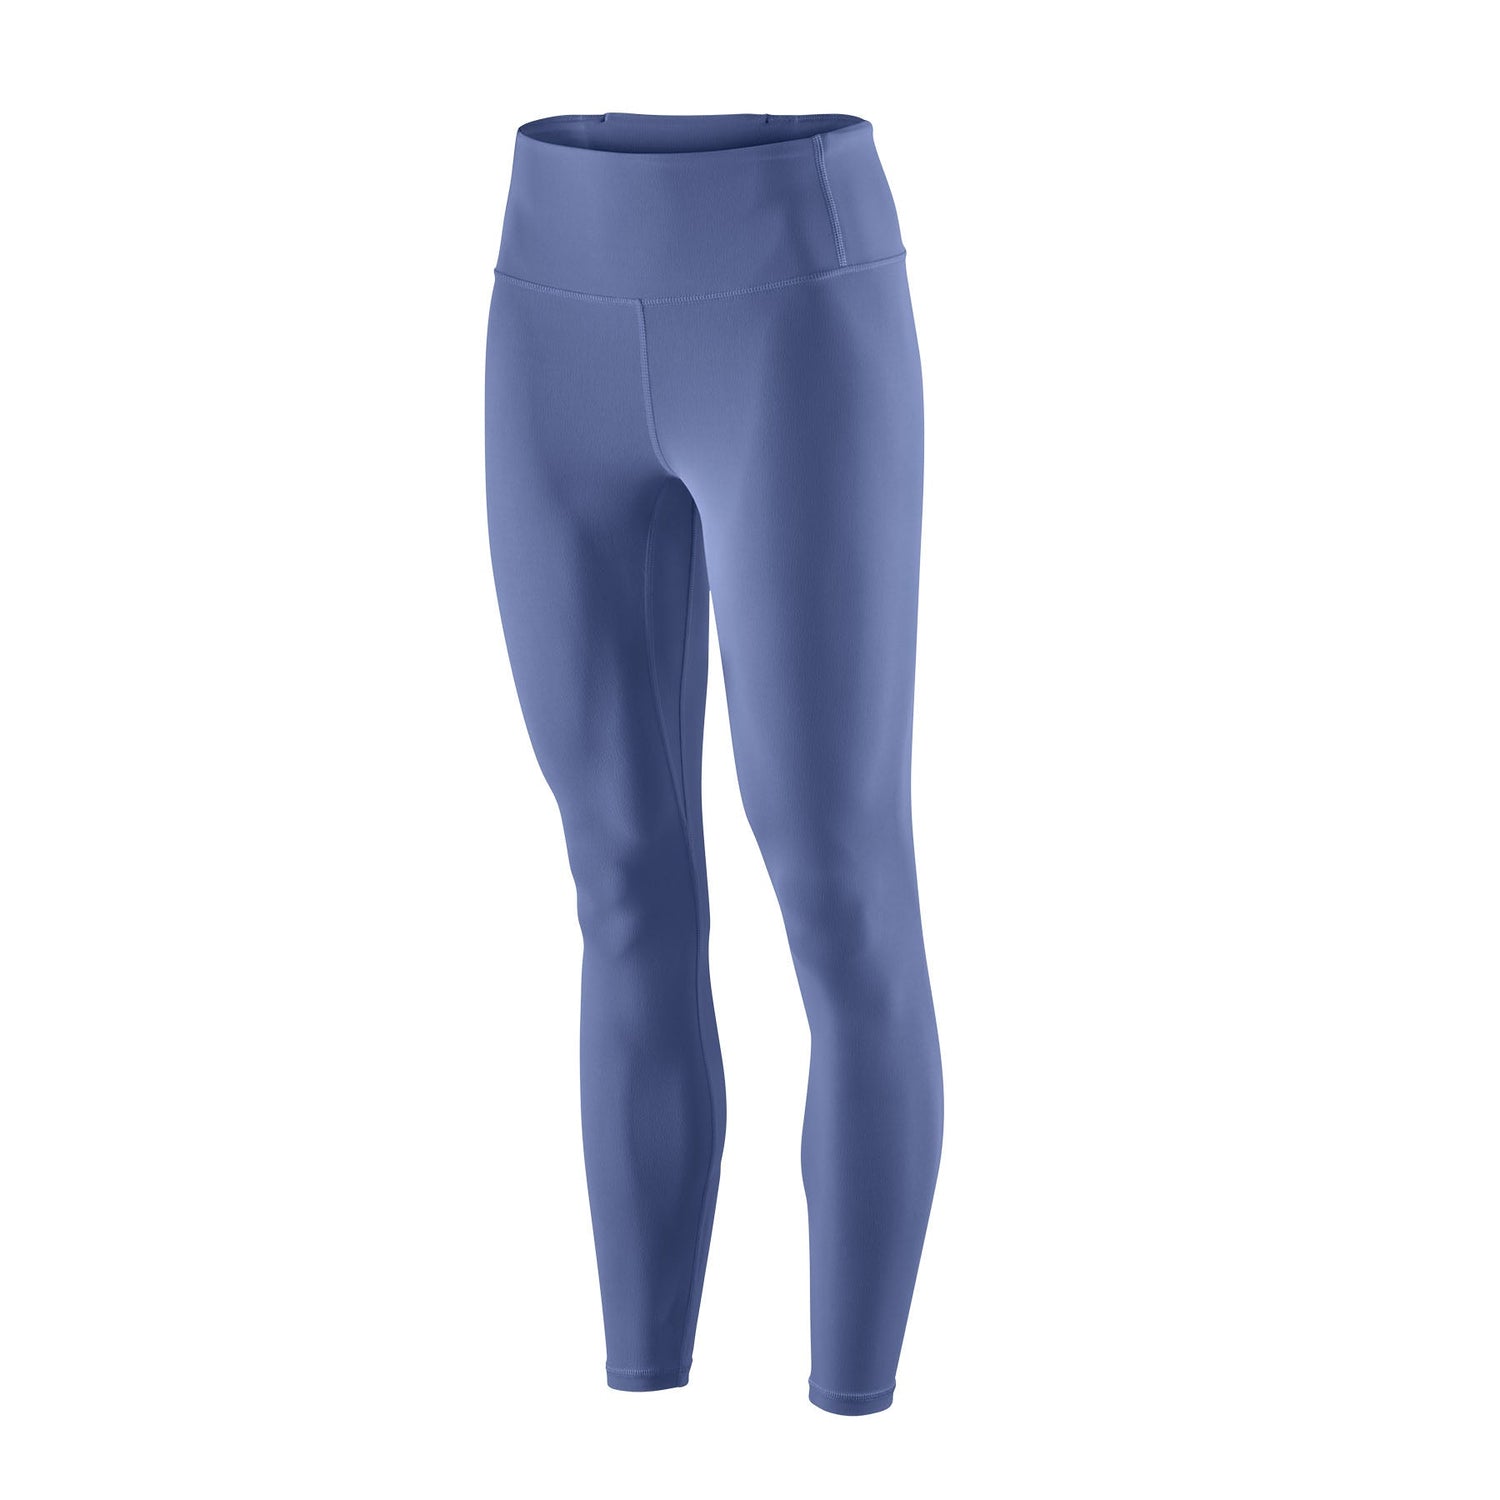 Patagonia W's Maipo 7/8 Tights - Recycled nylon Current Blue Pants